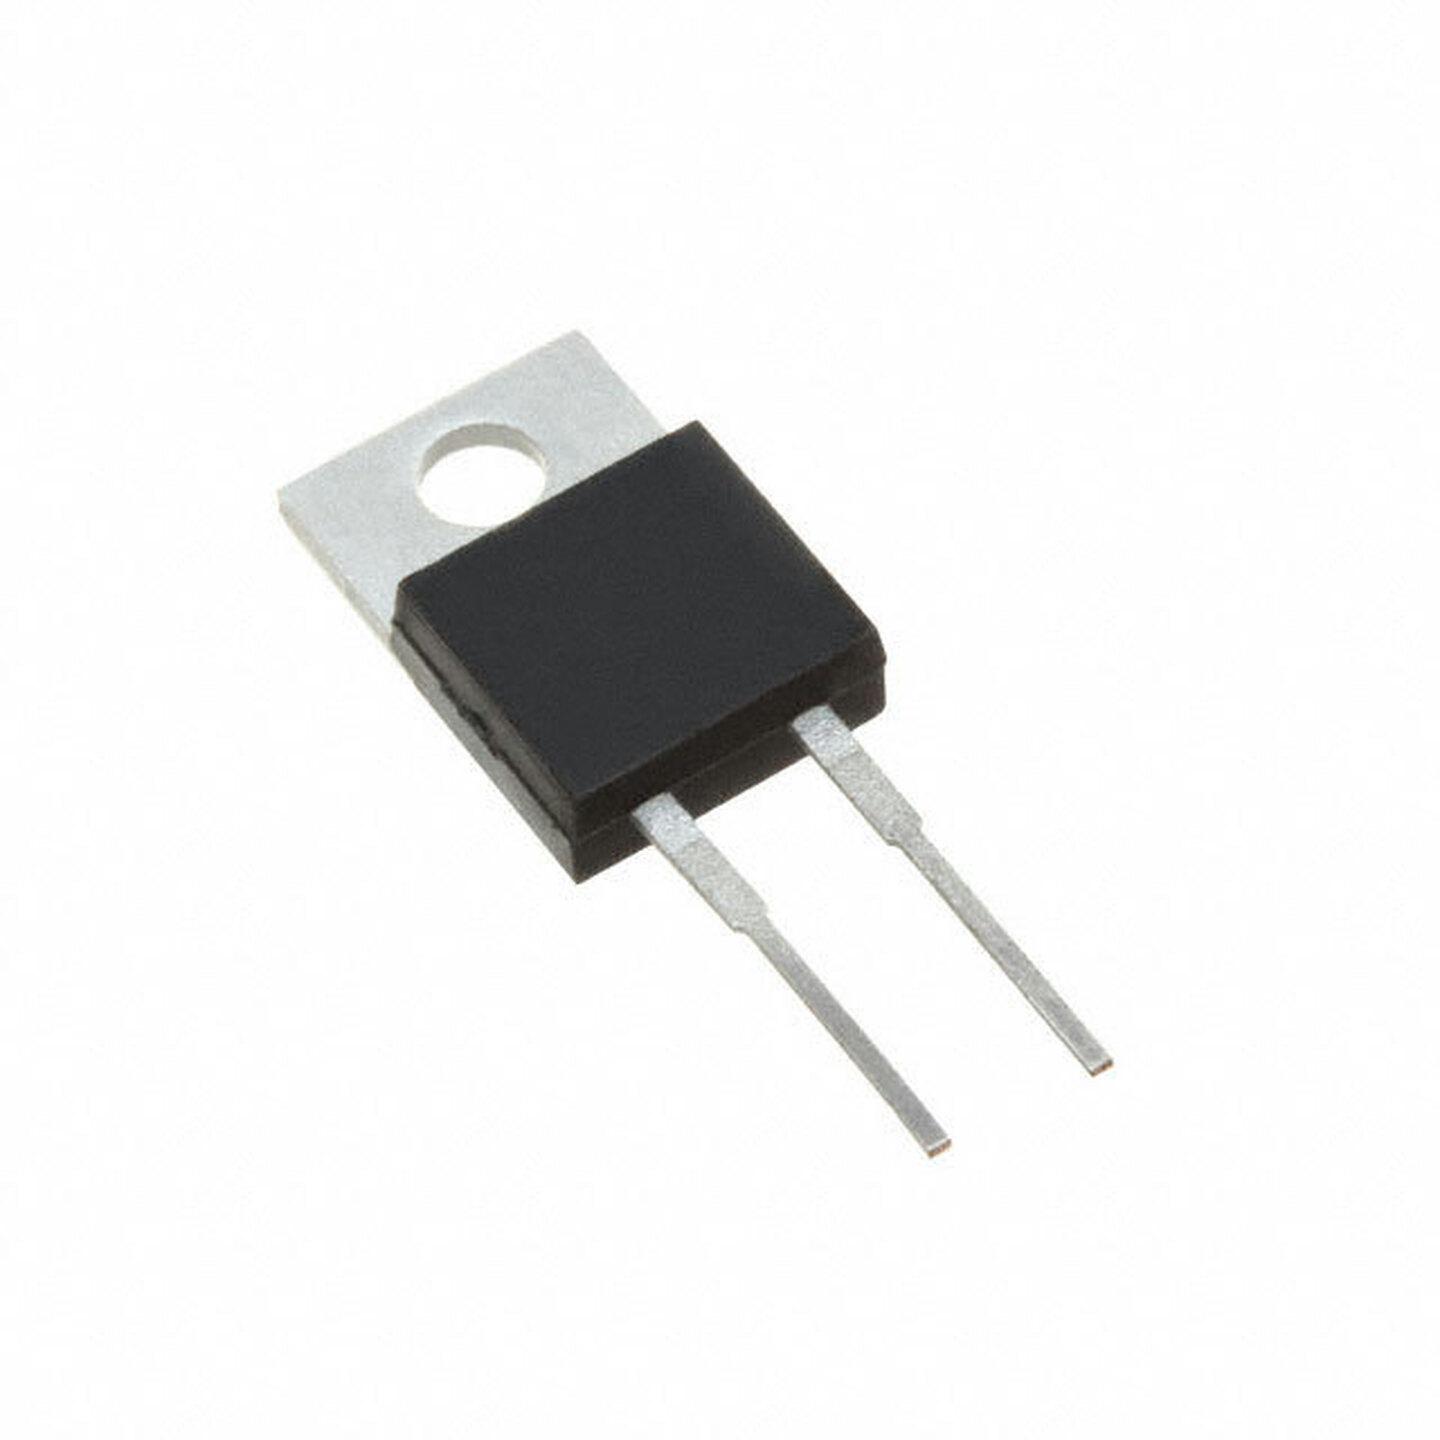 BY229 Fast Diode